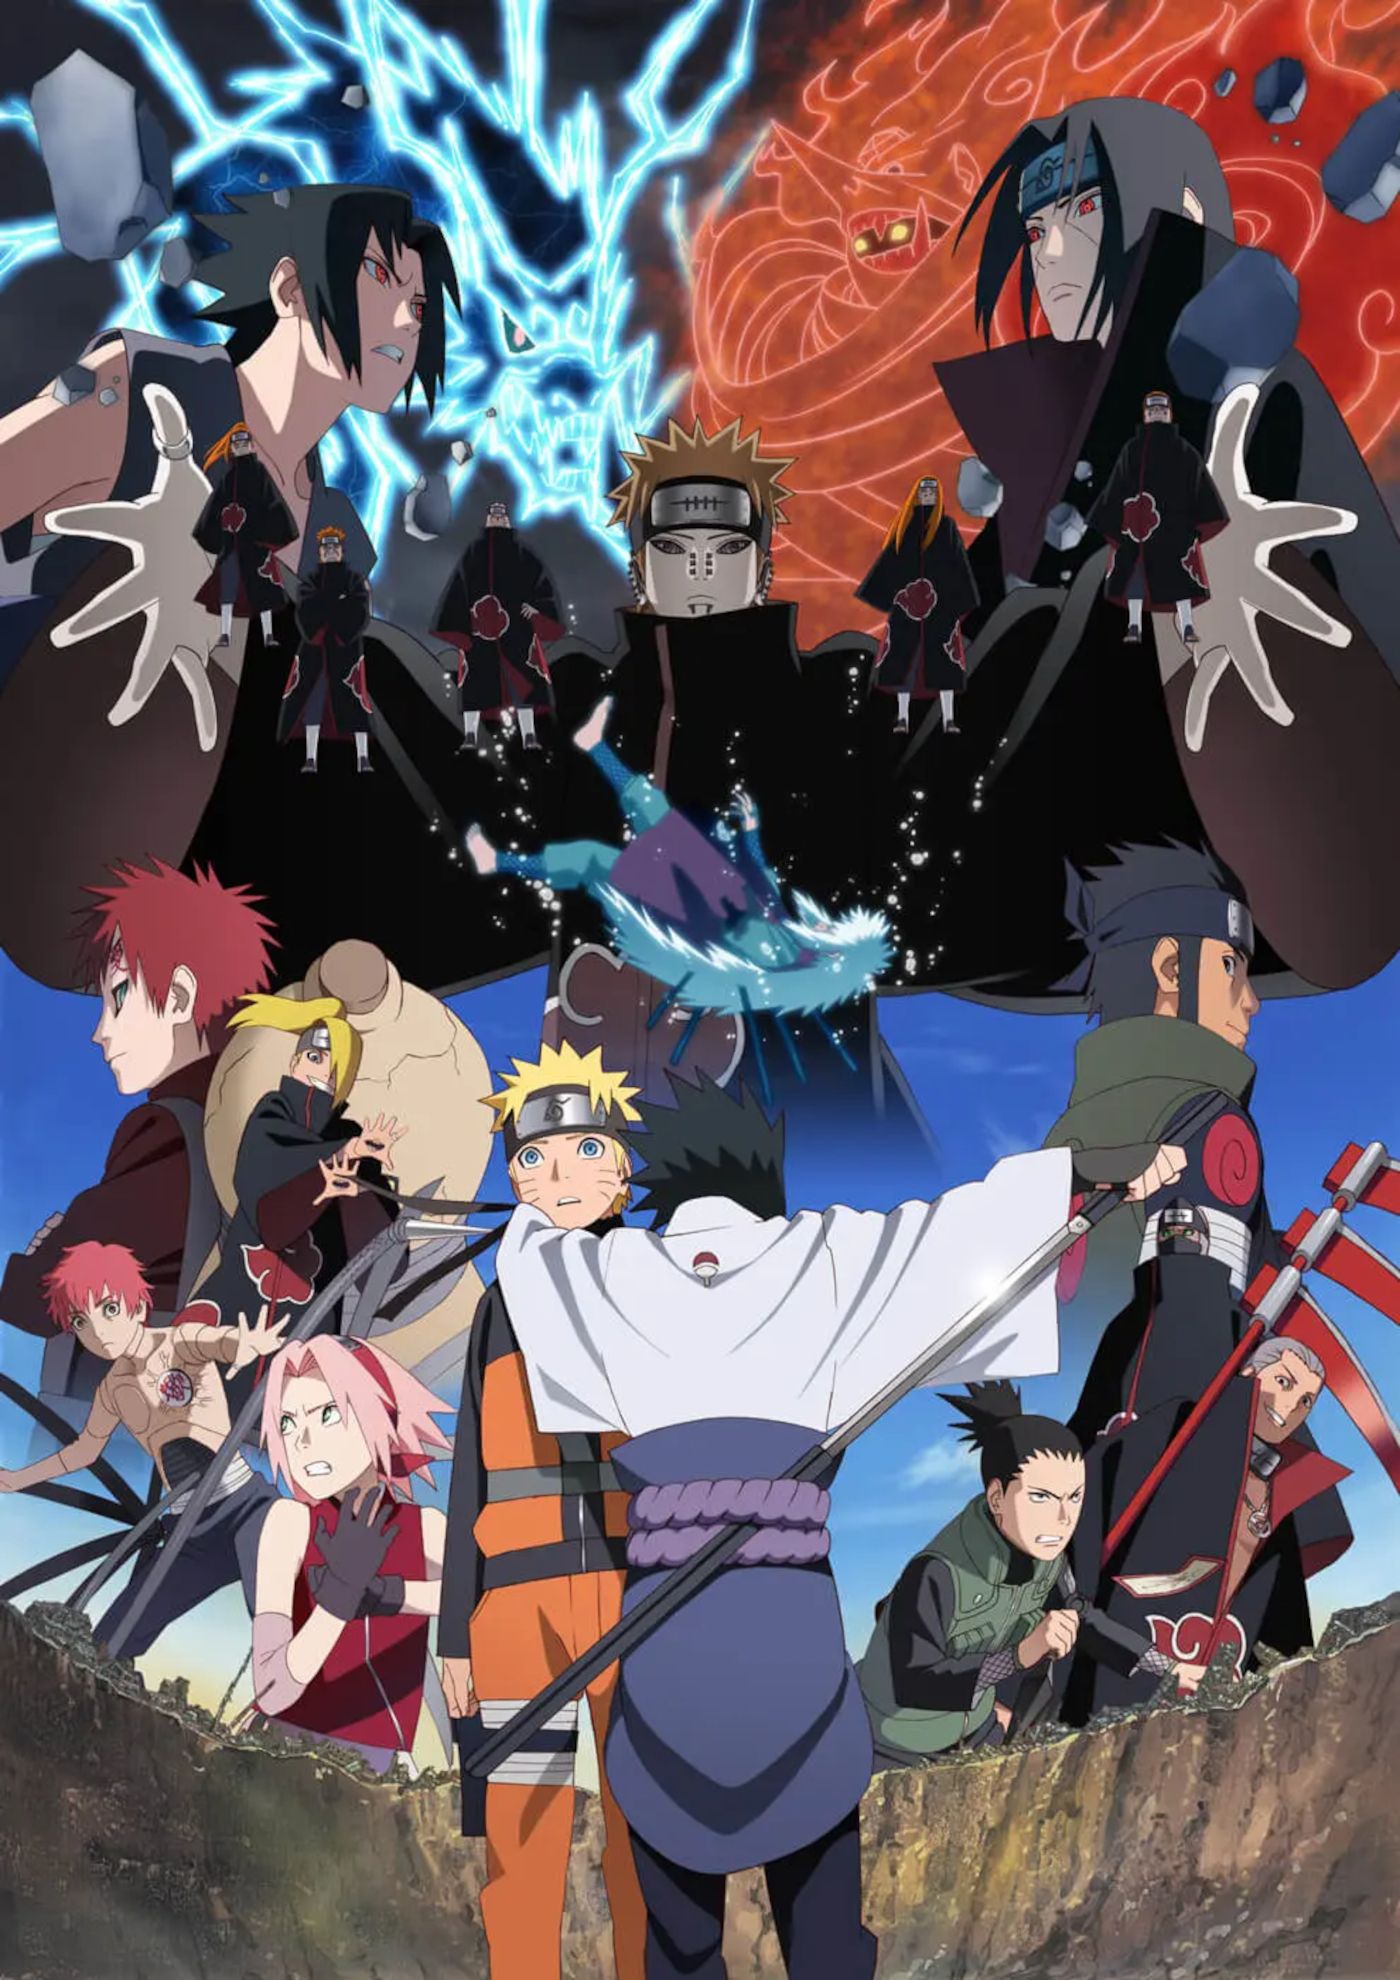 Naruto Shippuden’s 10 Best Episodes of All Time